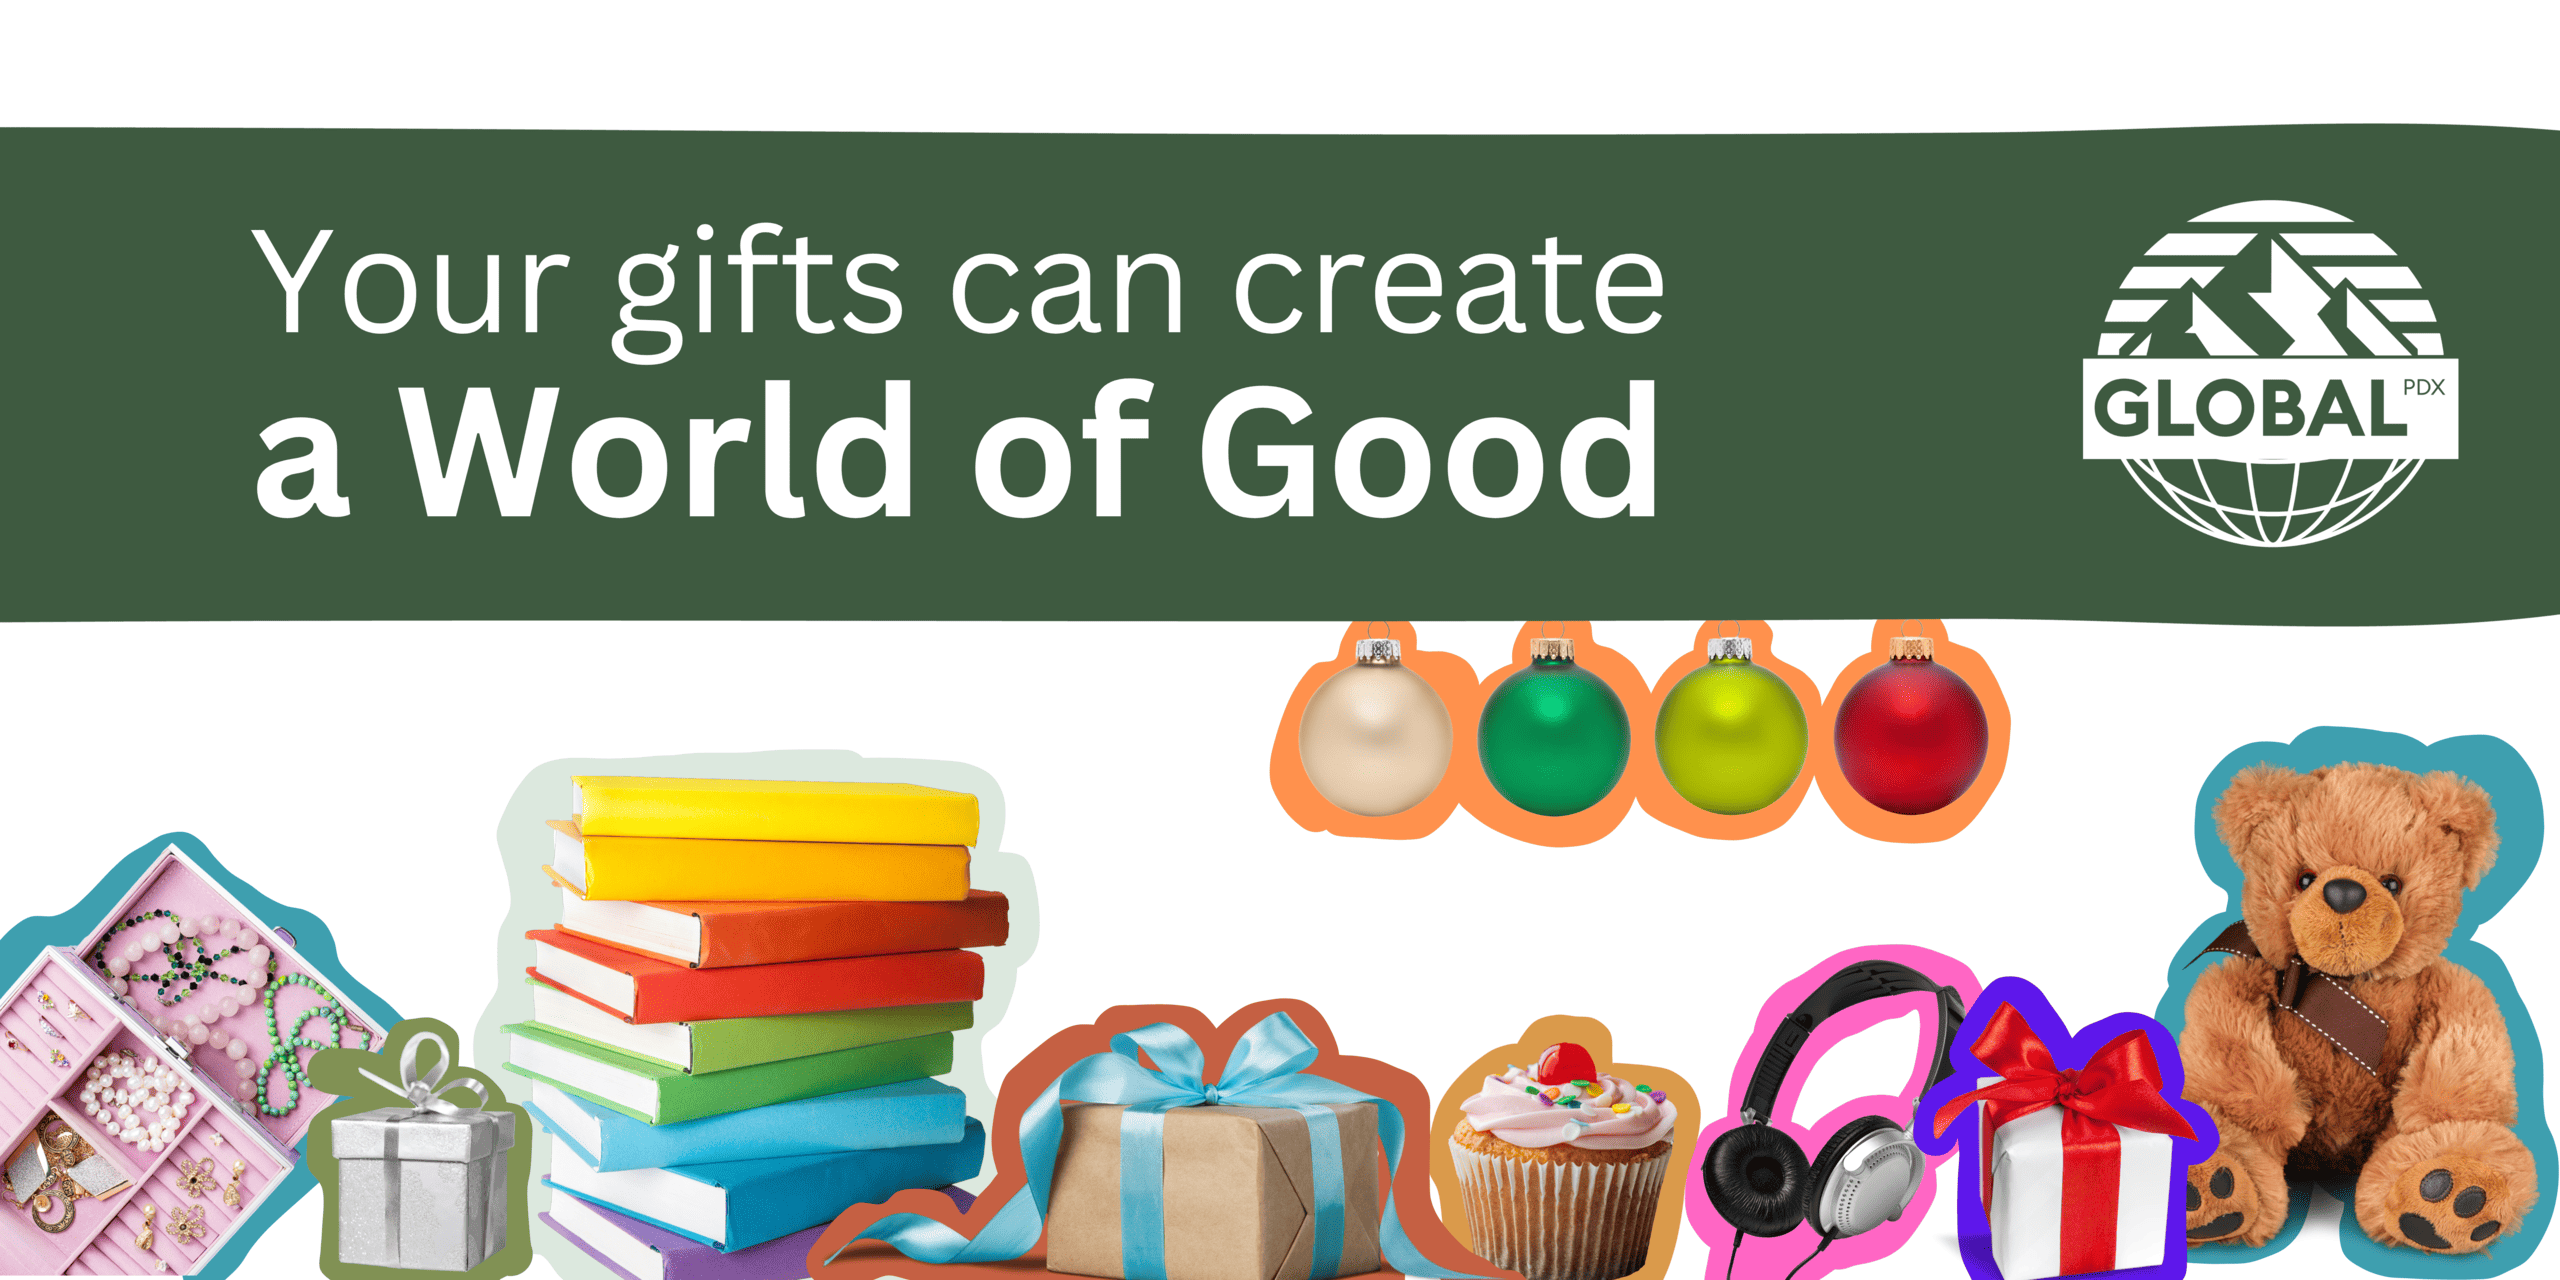 Your gifts can create a World of Good